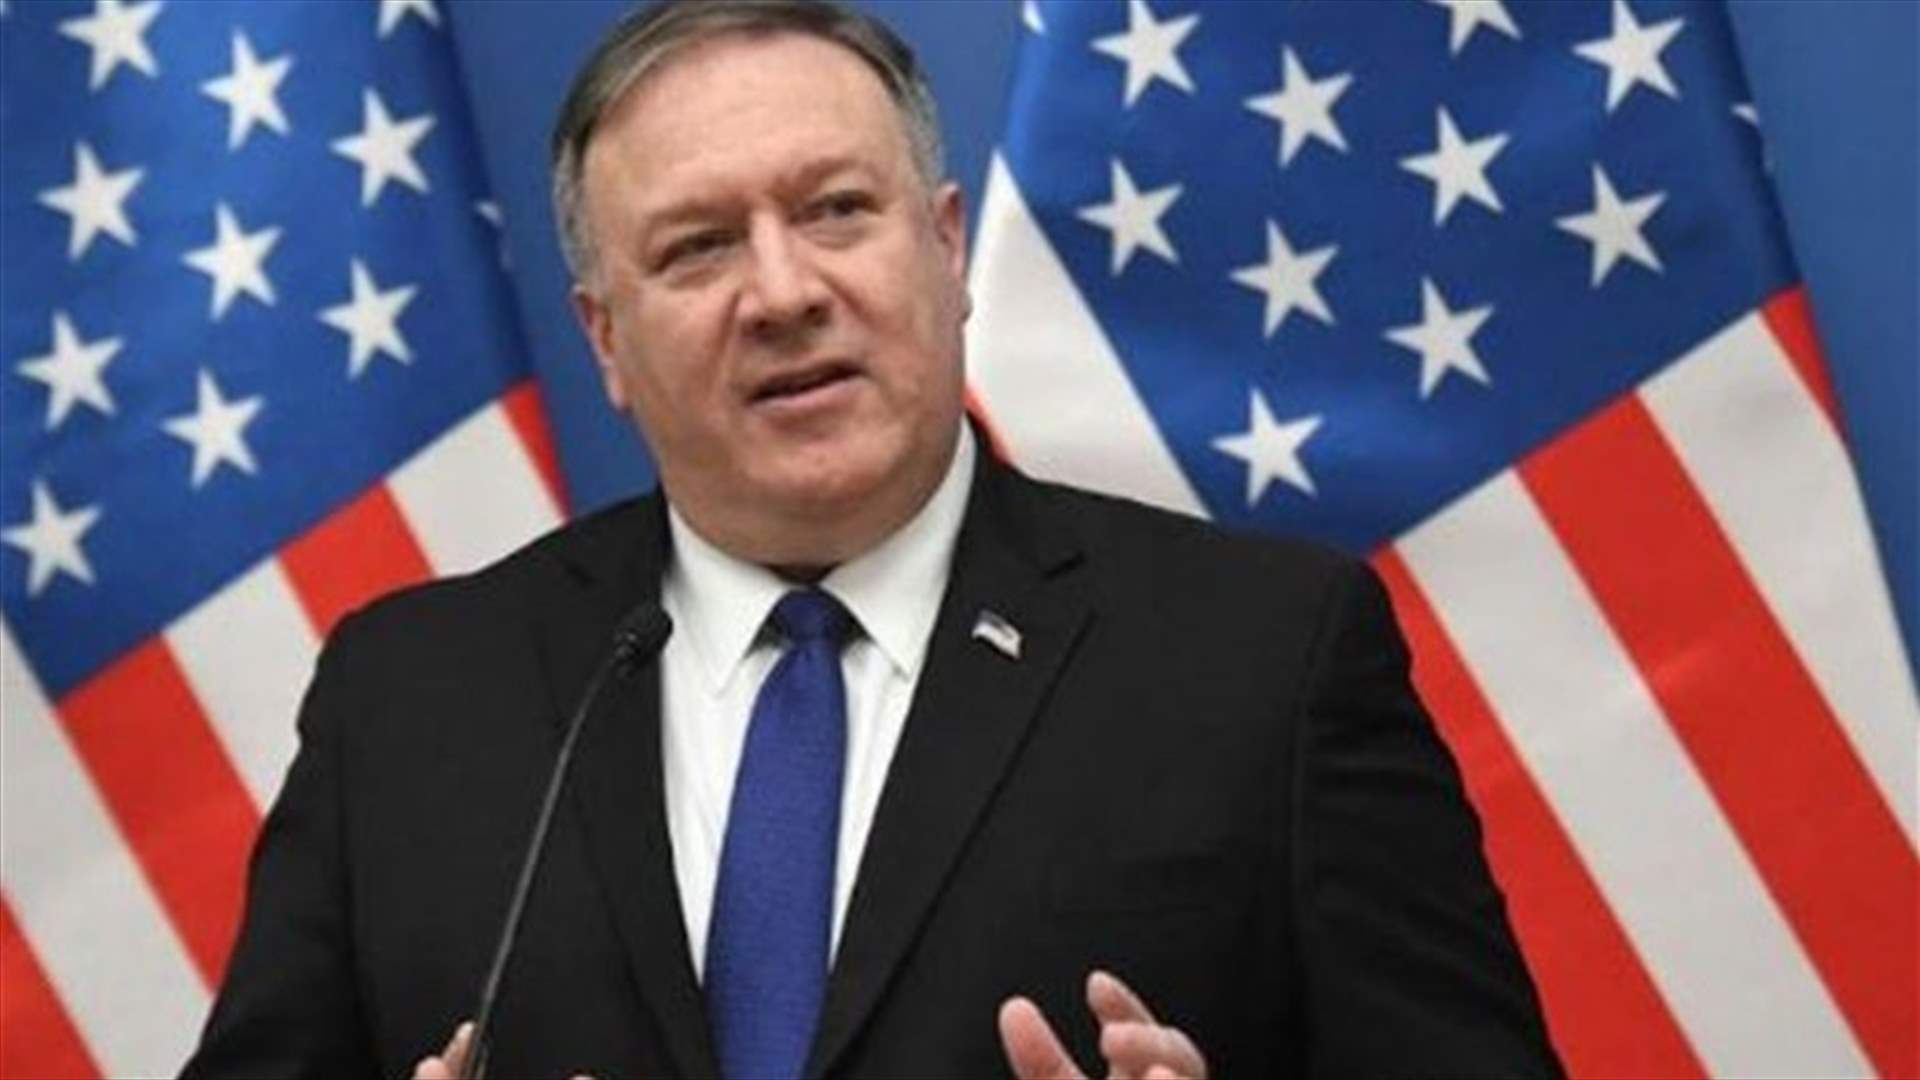 Pompeo tackles financial situation in Lebanon, says it is very serious